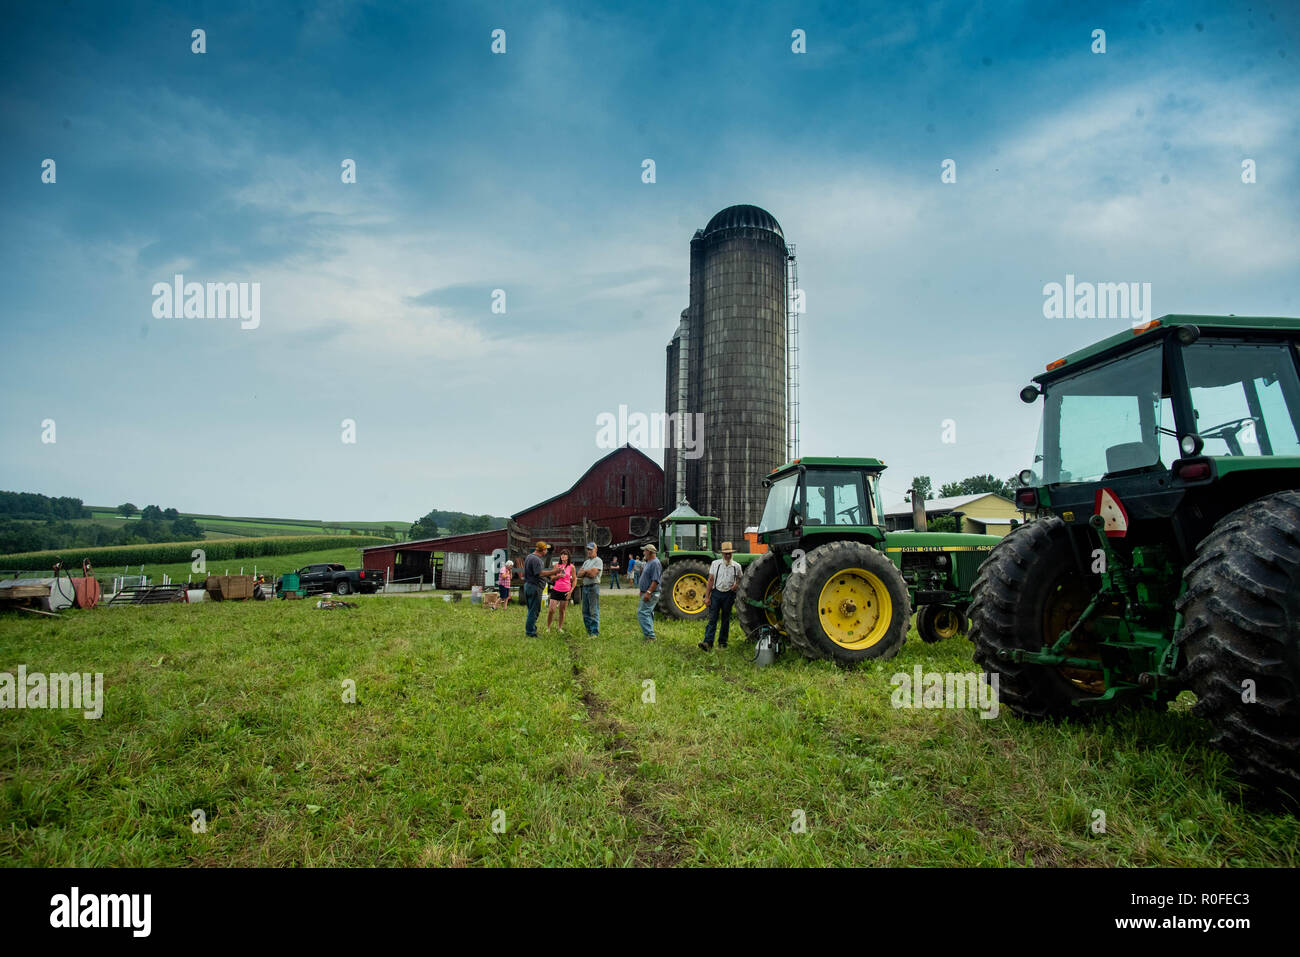 An auctioneer auctions off farm equipment at a family-run farm in the United States. Stock Photo